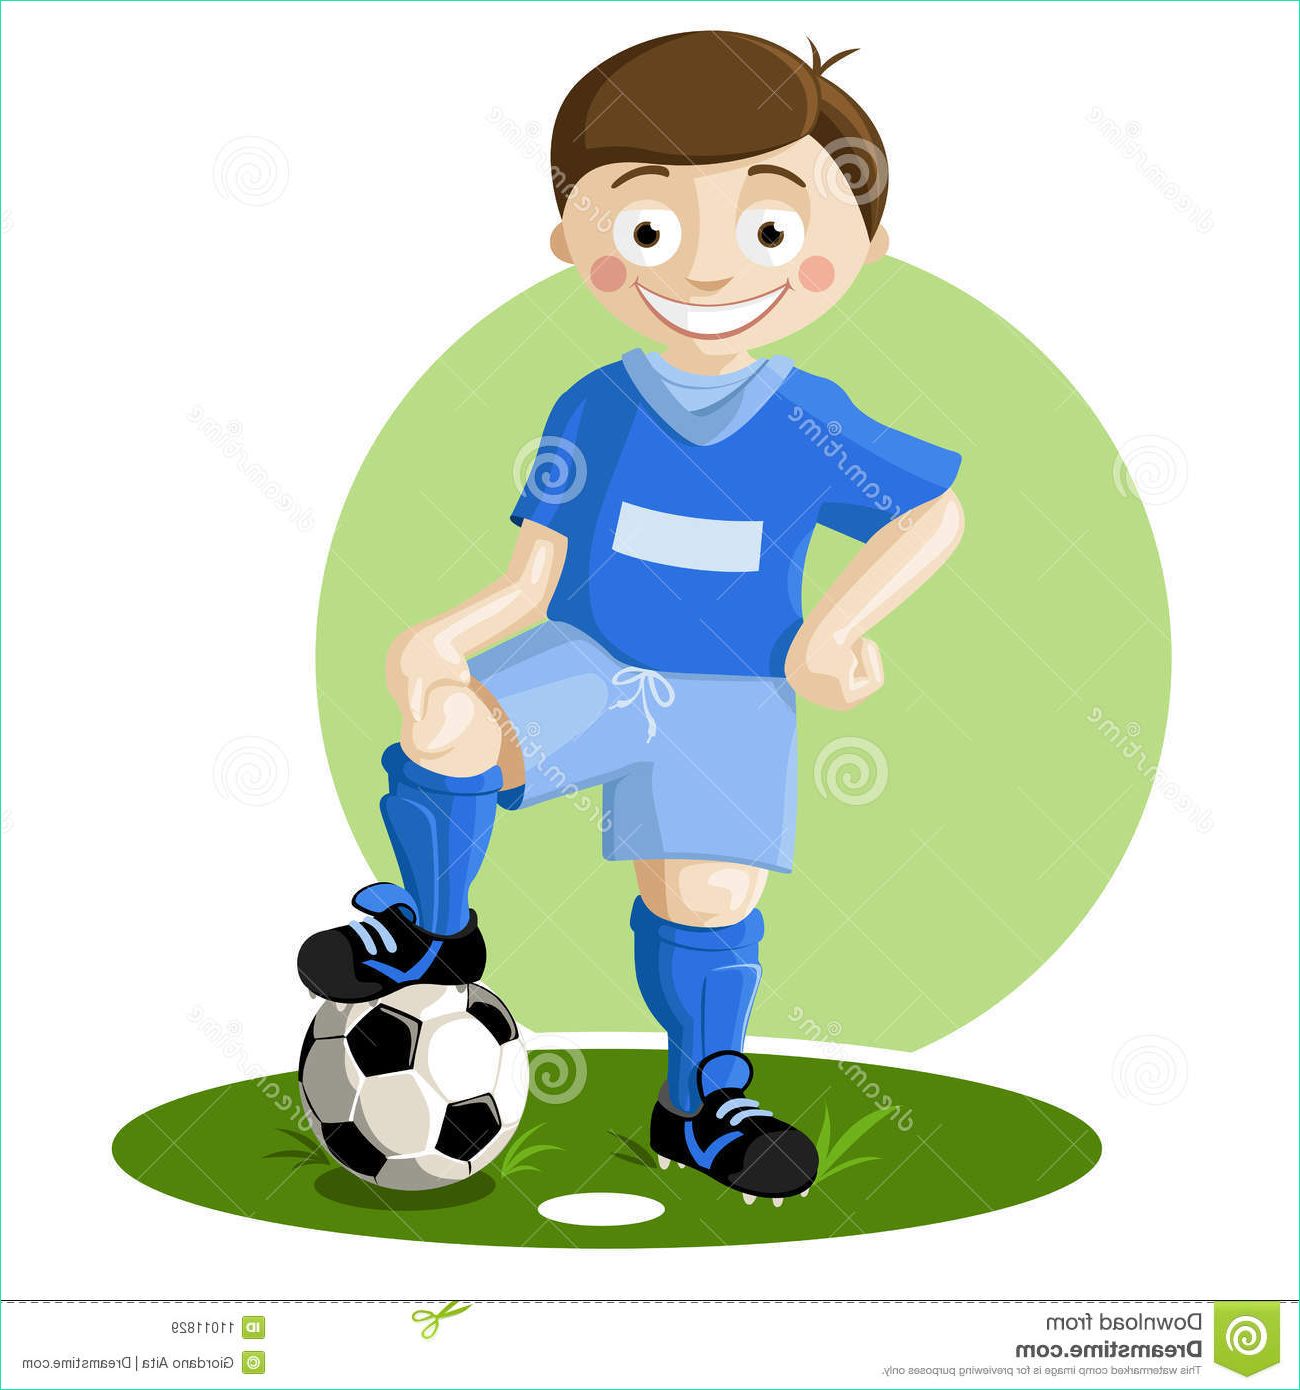 royalty free stock images soccer player image